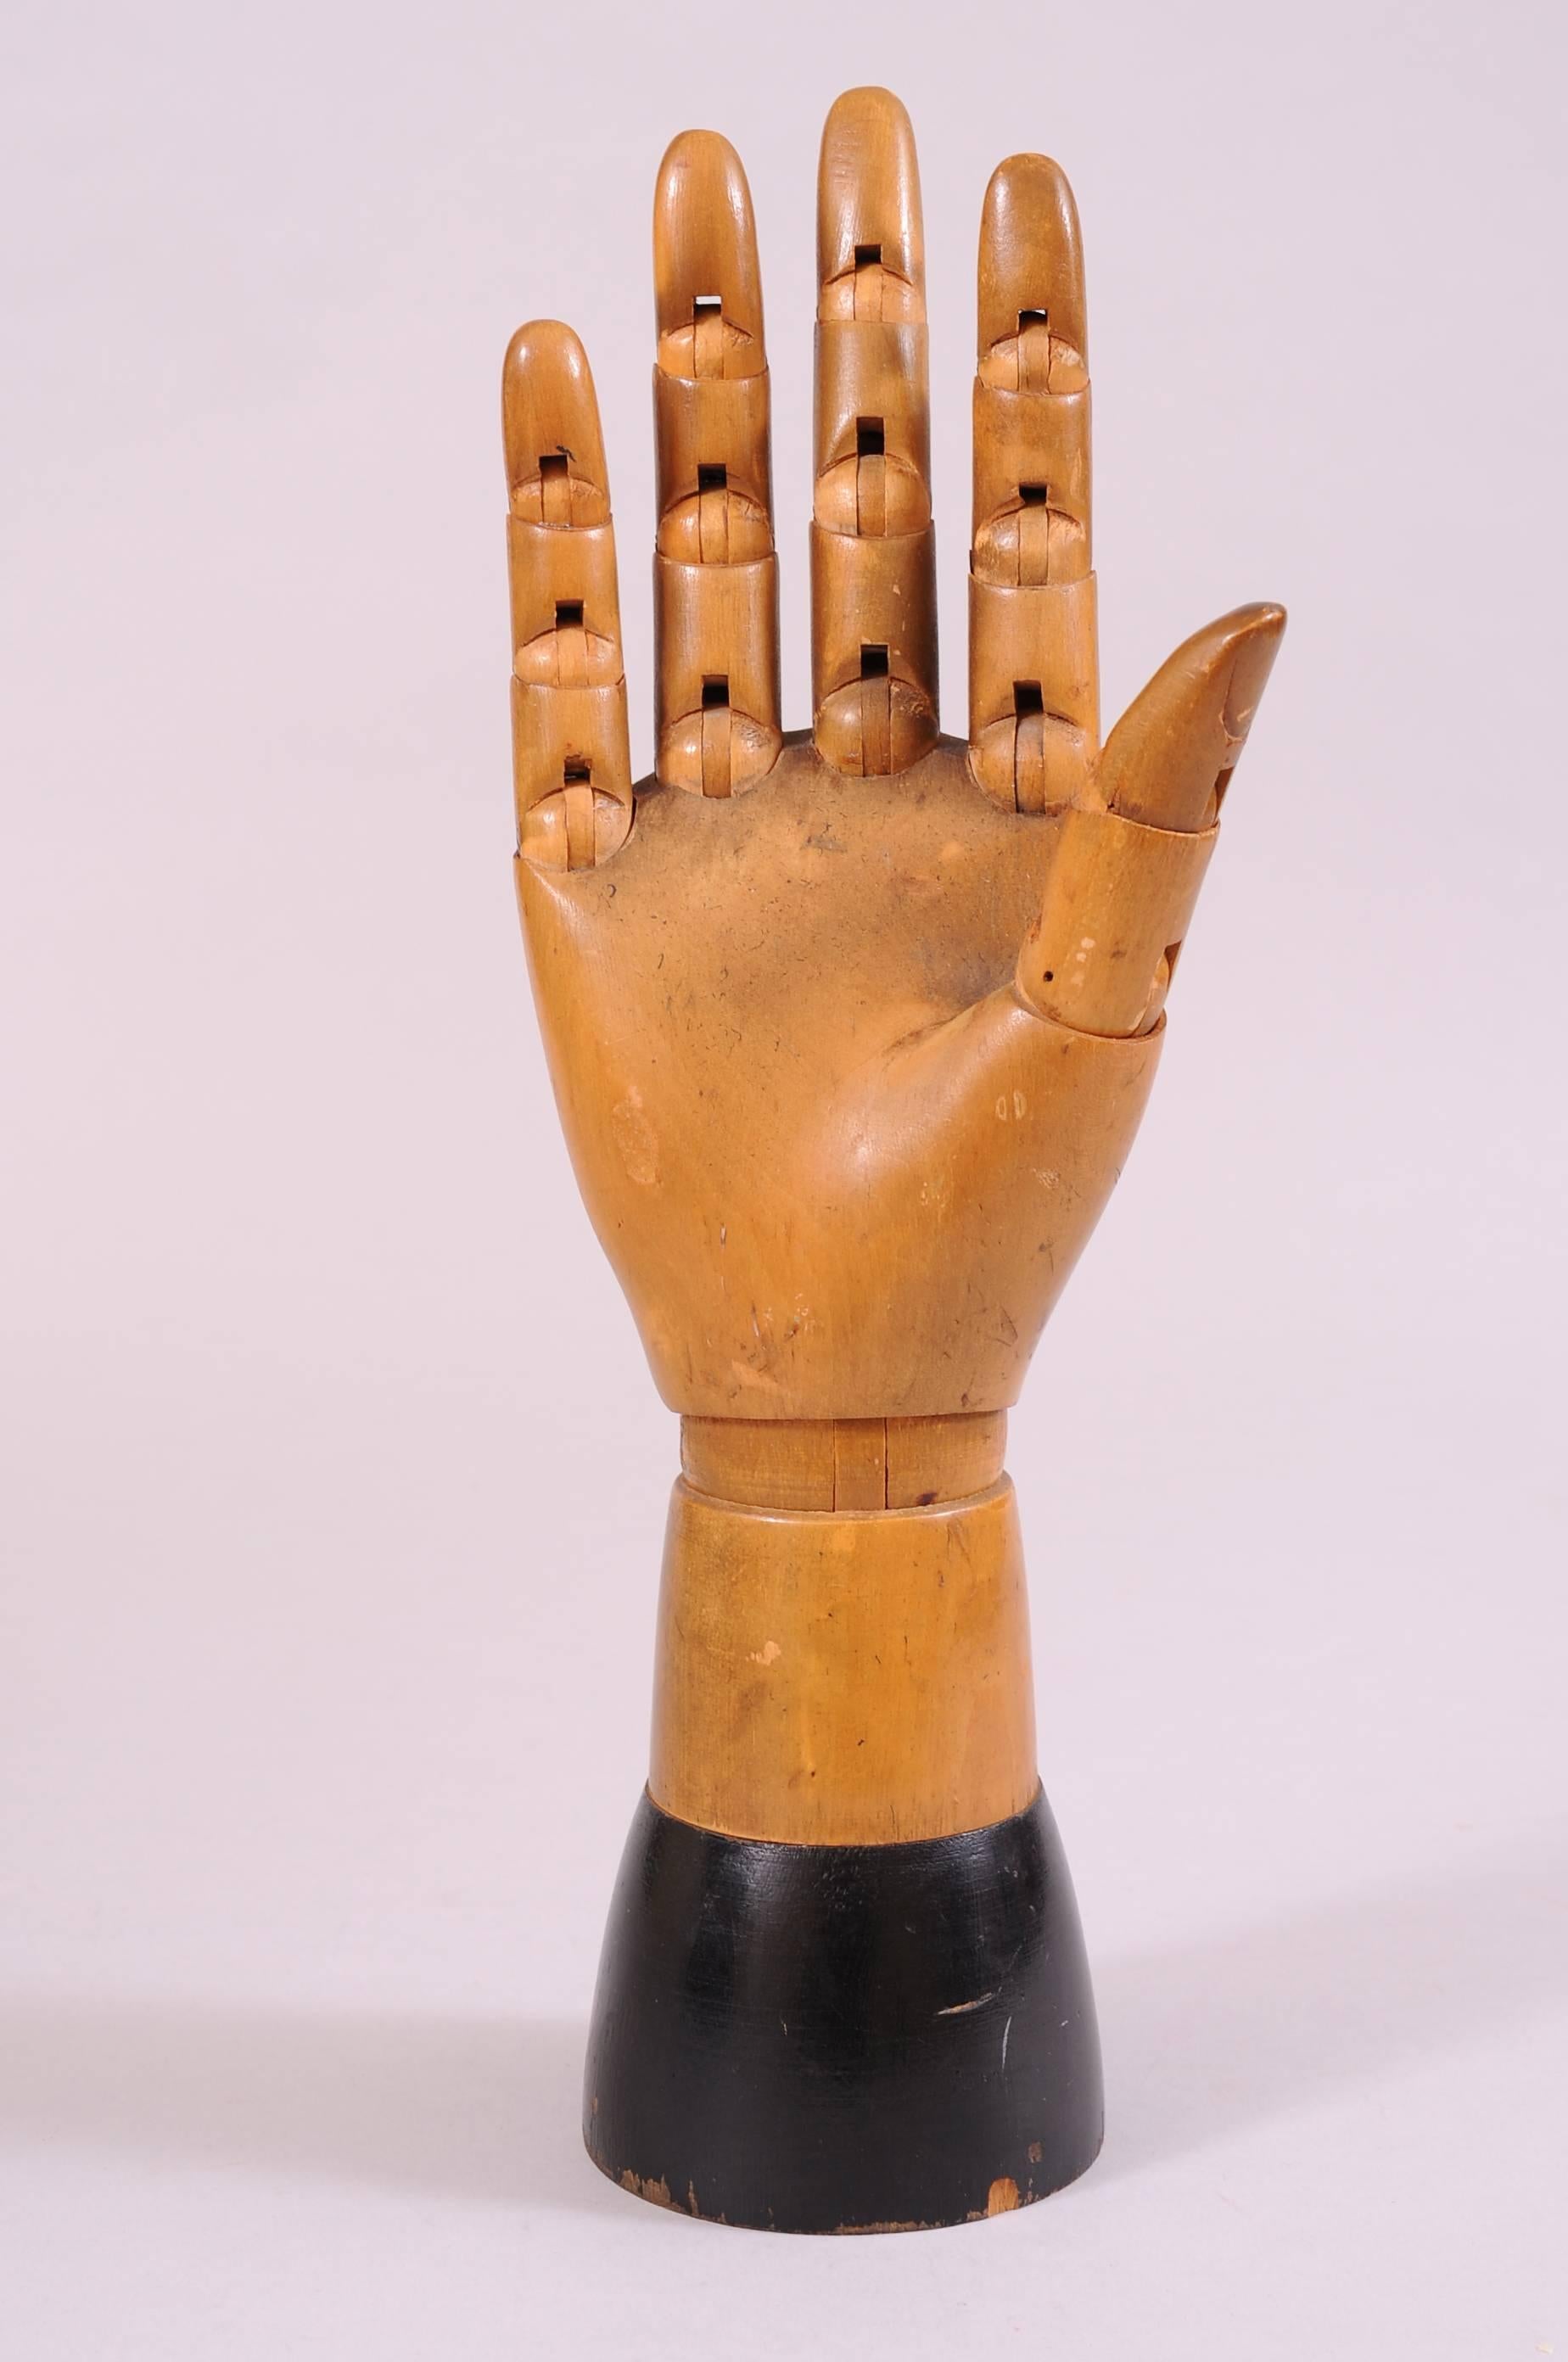 hand model for artists